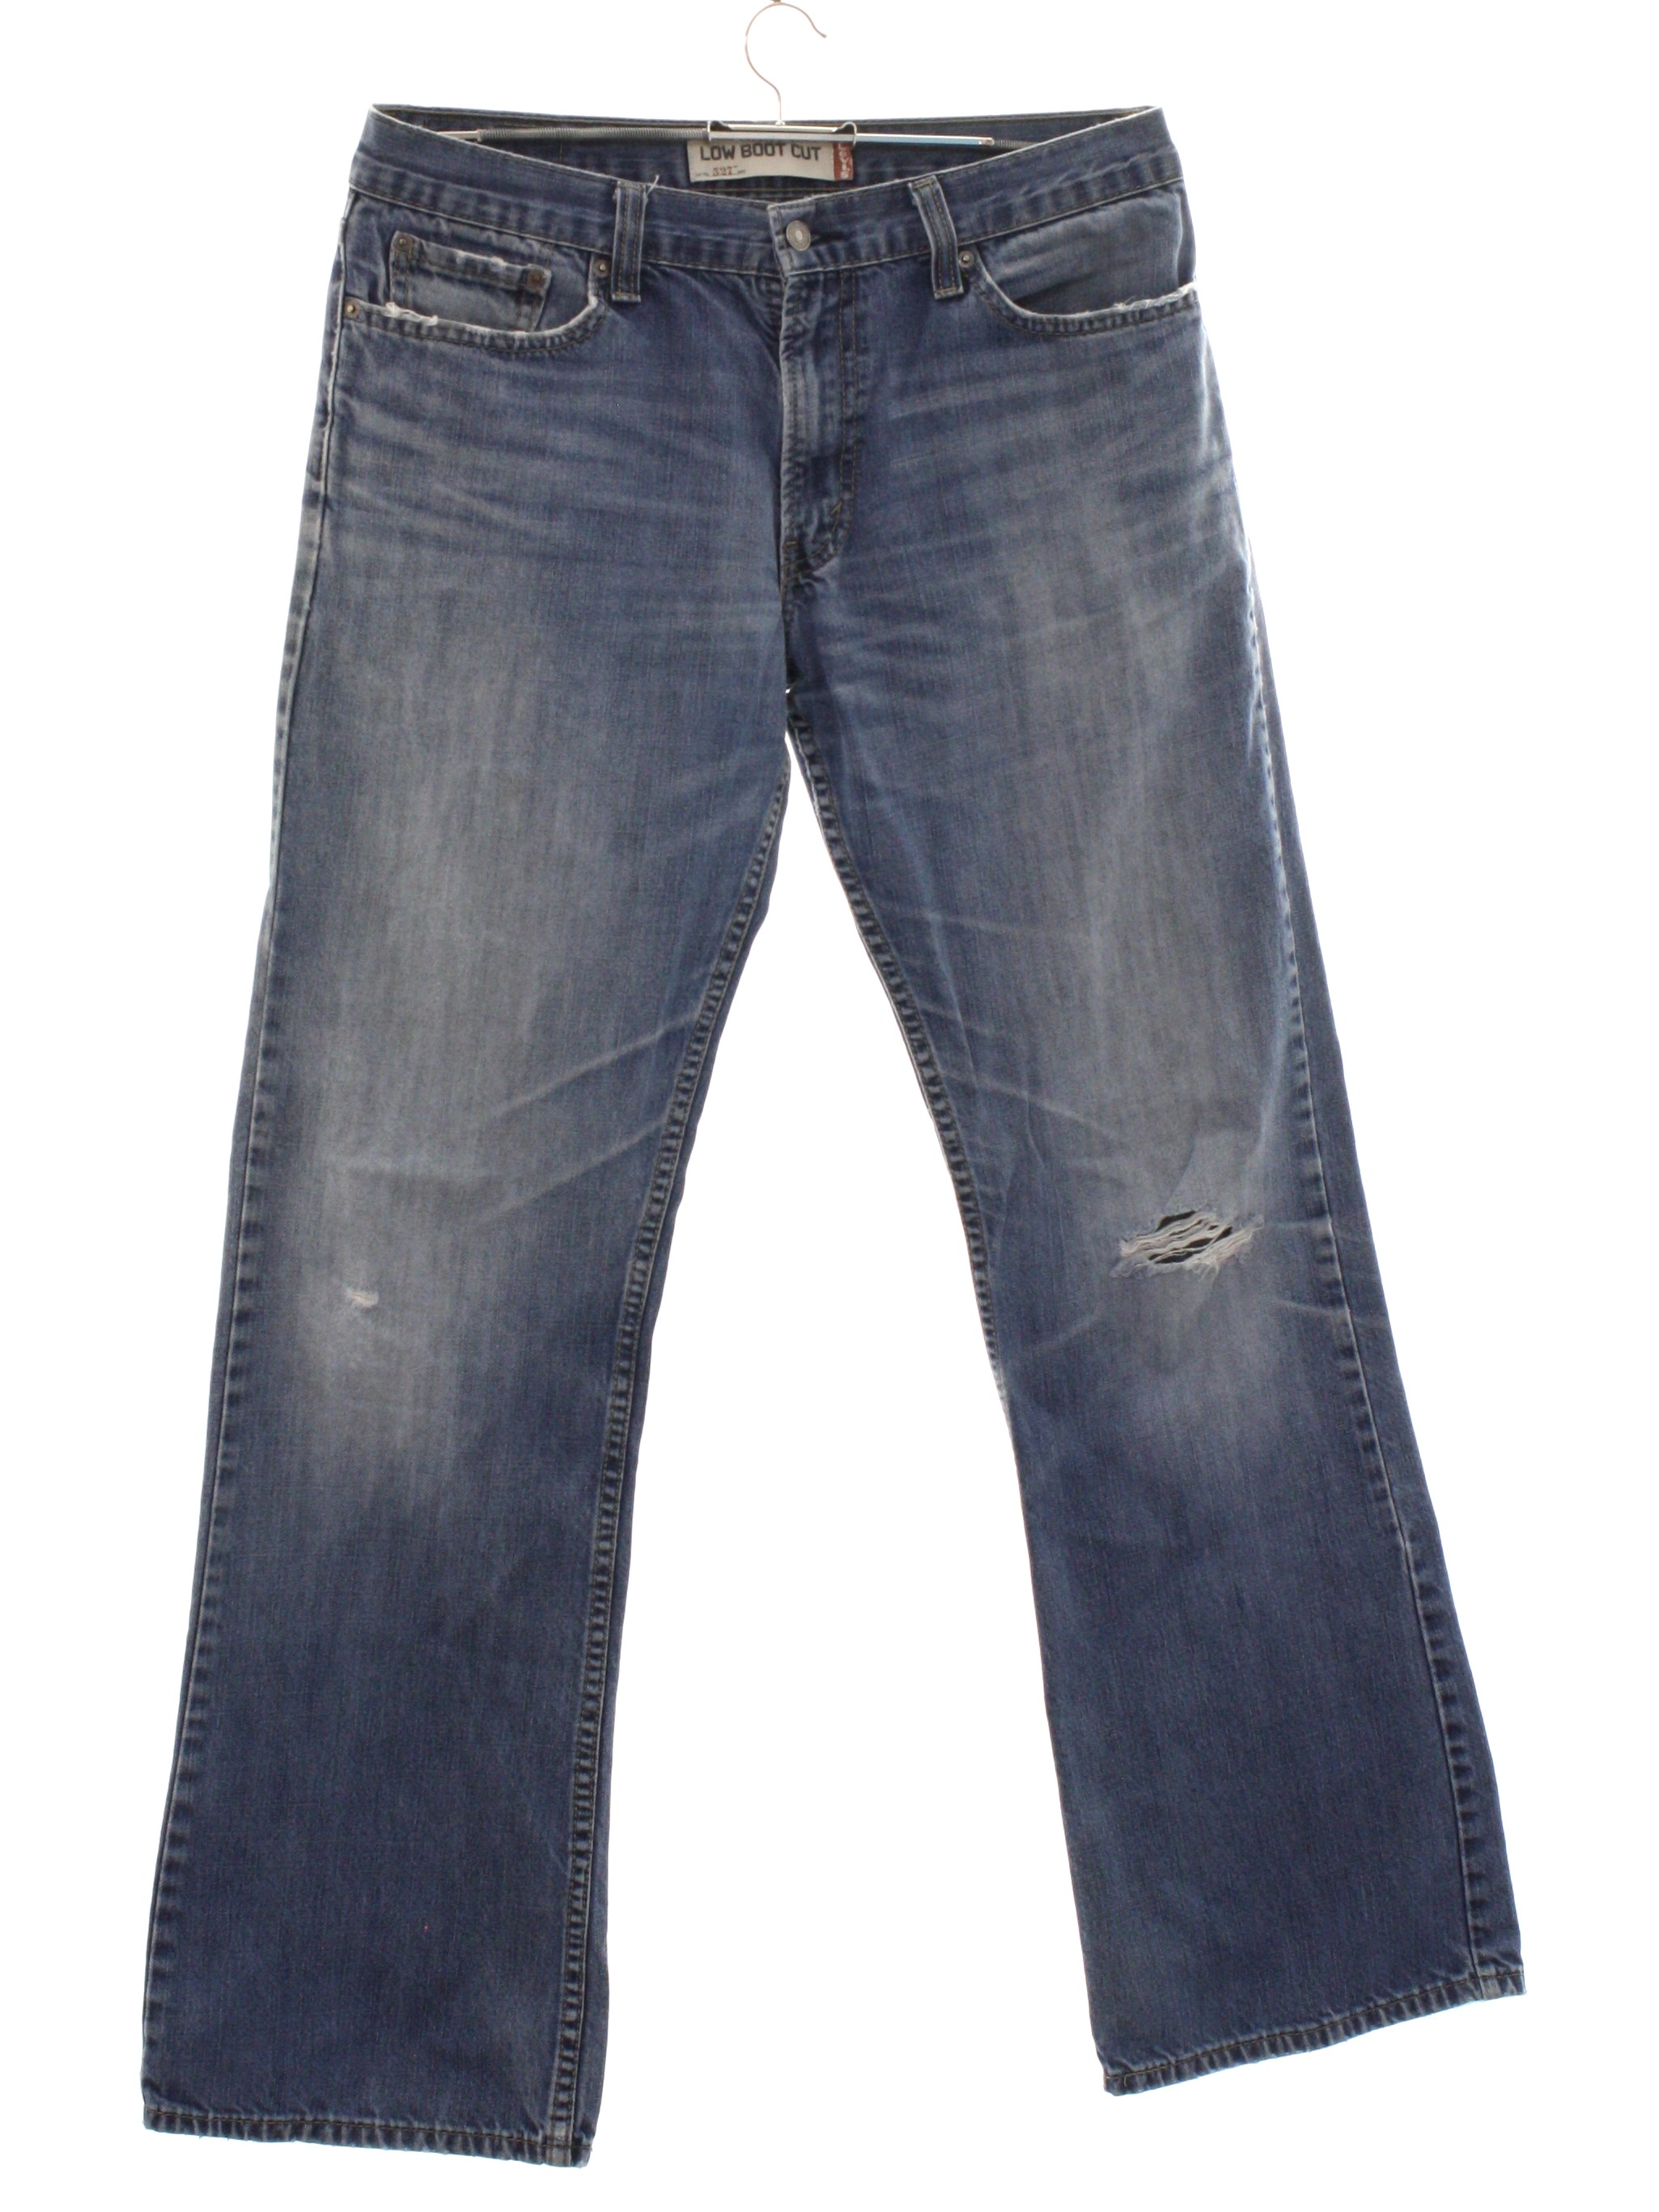 Flared Pants / Flares: 90s -Levis 527- Mens heavily faded and worn blue ...